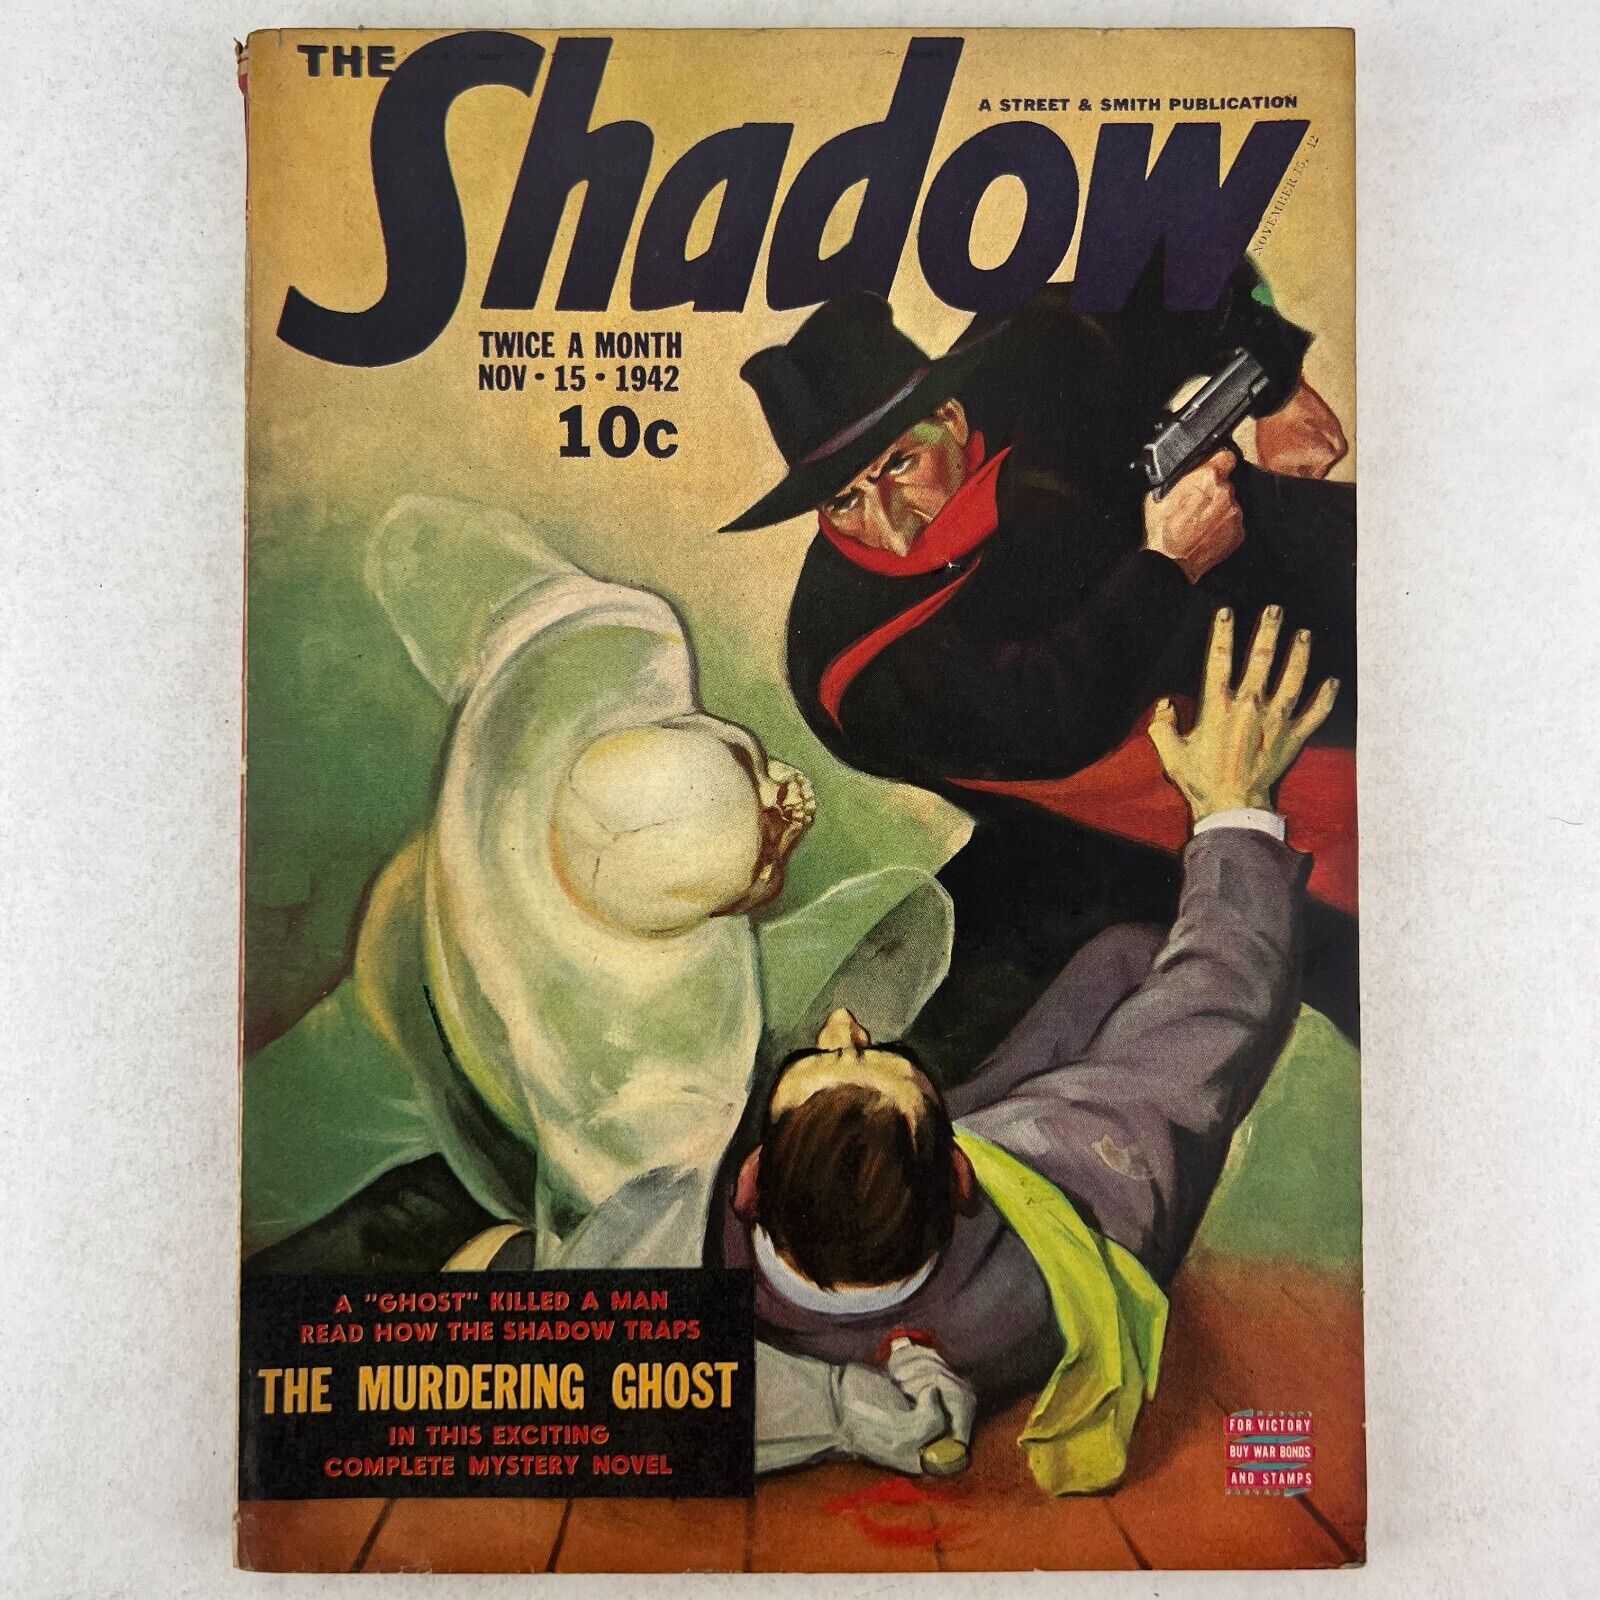 RARE  THE SHADOW PULP -  Nov 15th 1942 Vol.43, #6 - THE MURDERING GHOST  - VF